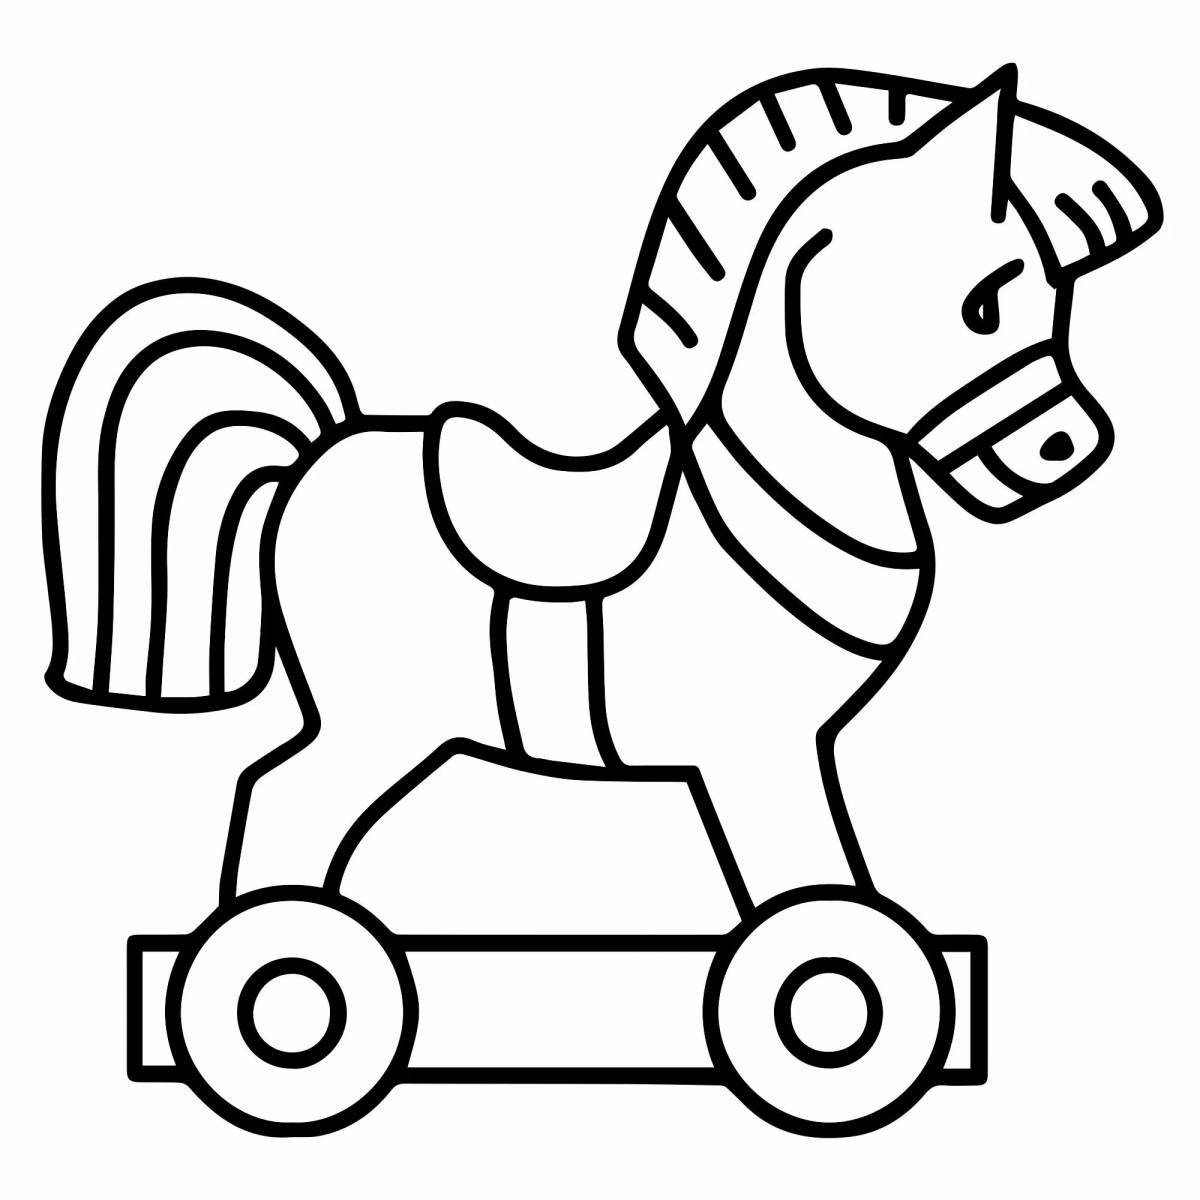 Amazing horse coloring page for 2-3 year olds